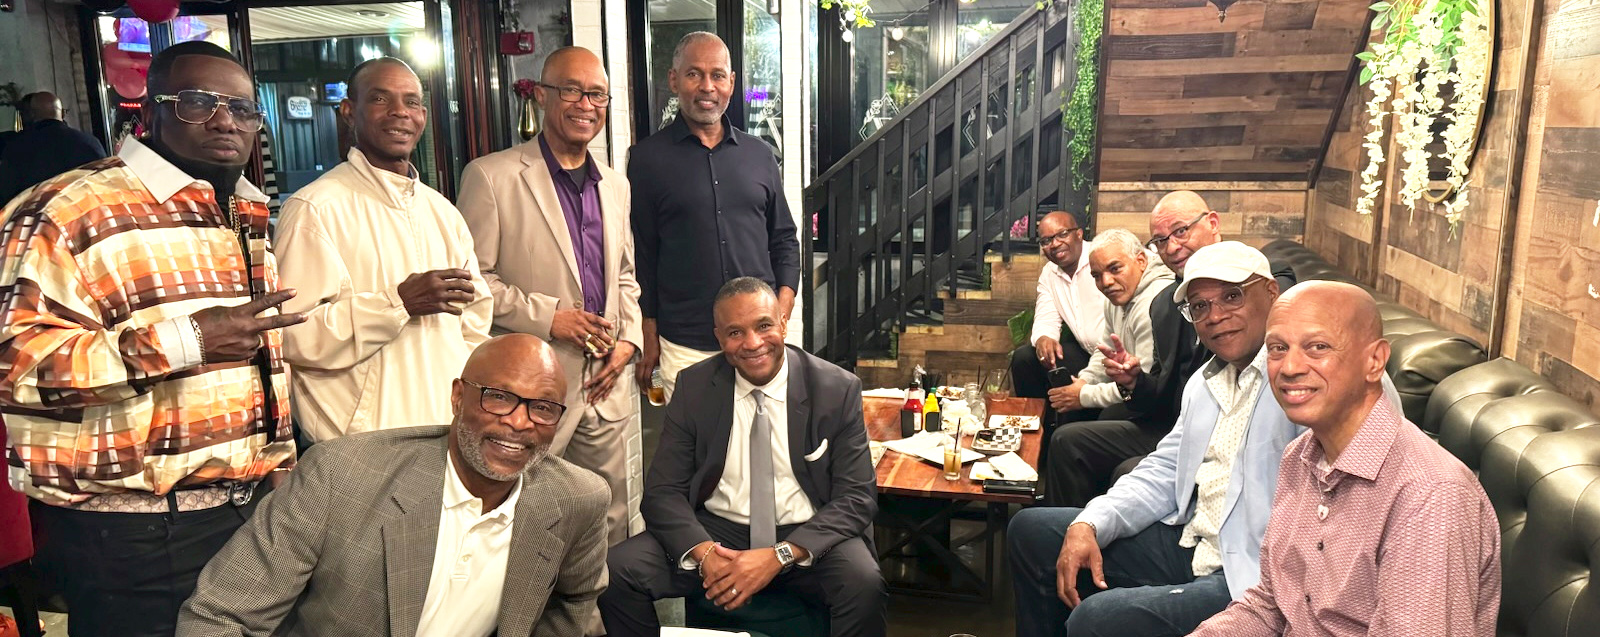 THE FELLAS GET TOGETHER TO CELEBRATE THE LIFE OF 'MOMA ANDREWS’